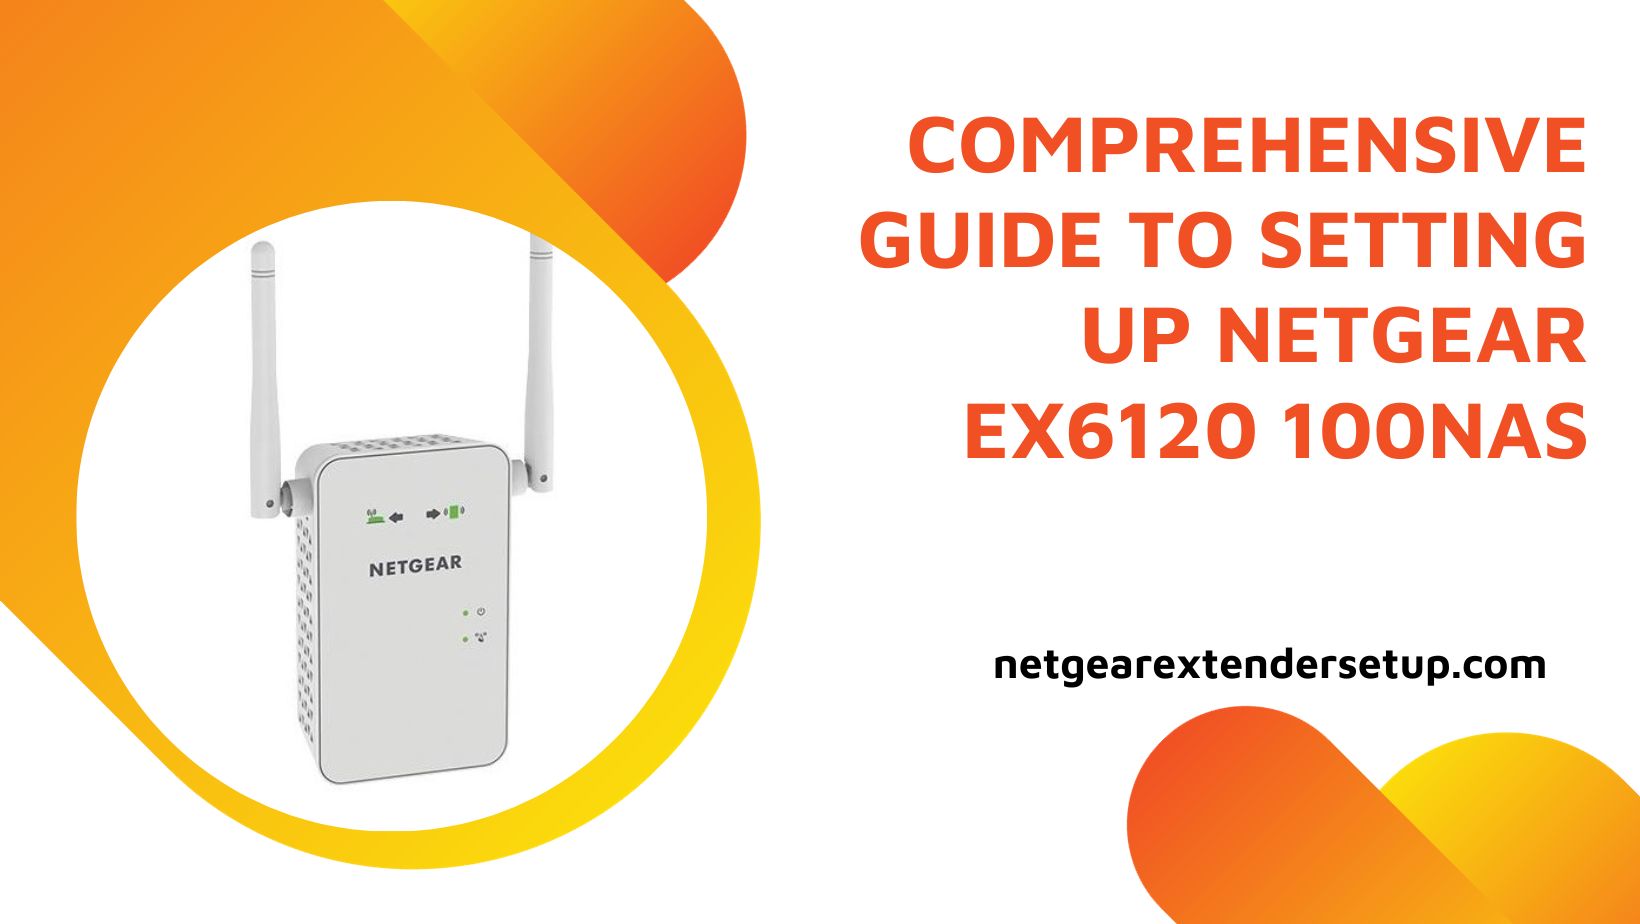 You are currently viewing Comprehensive Guide to Setting Up Netgear EX6120 100NAS